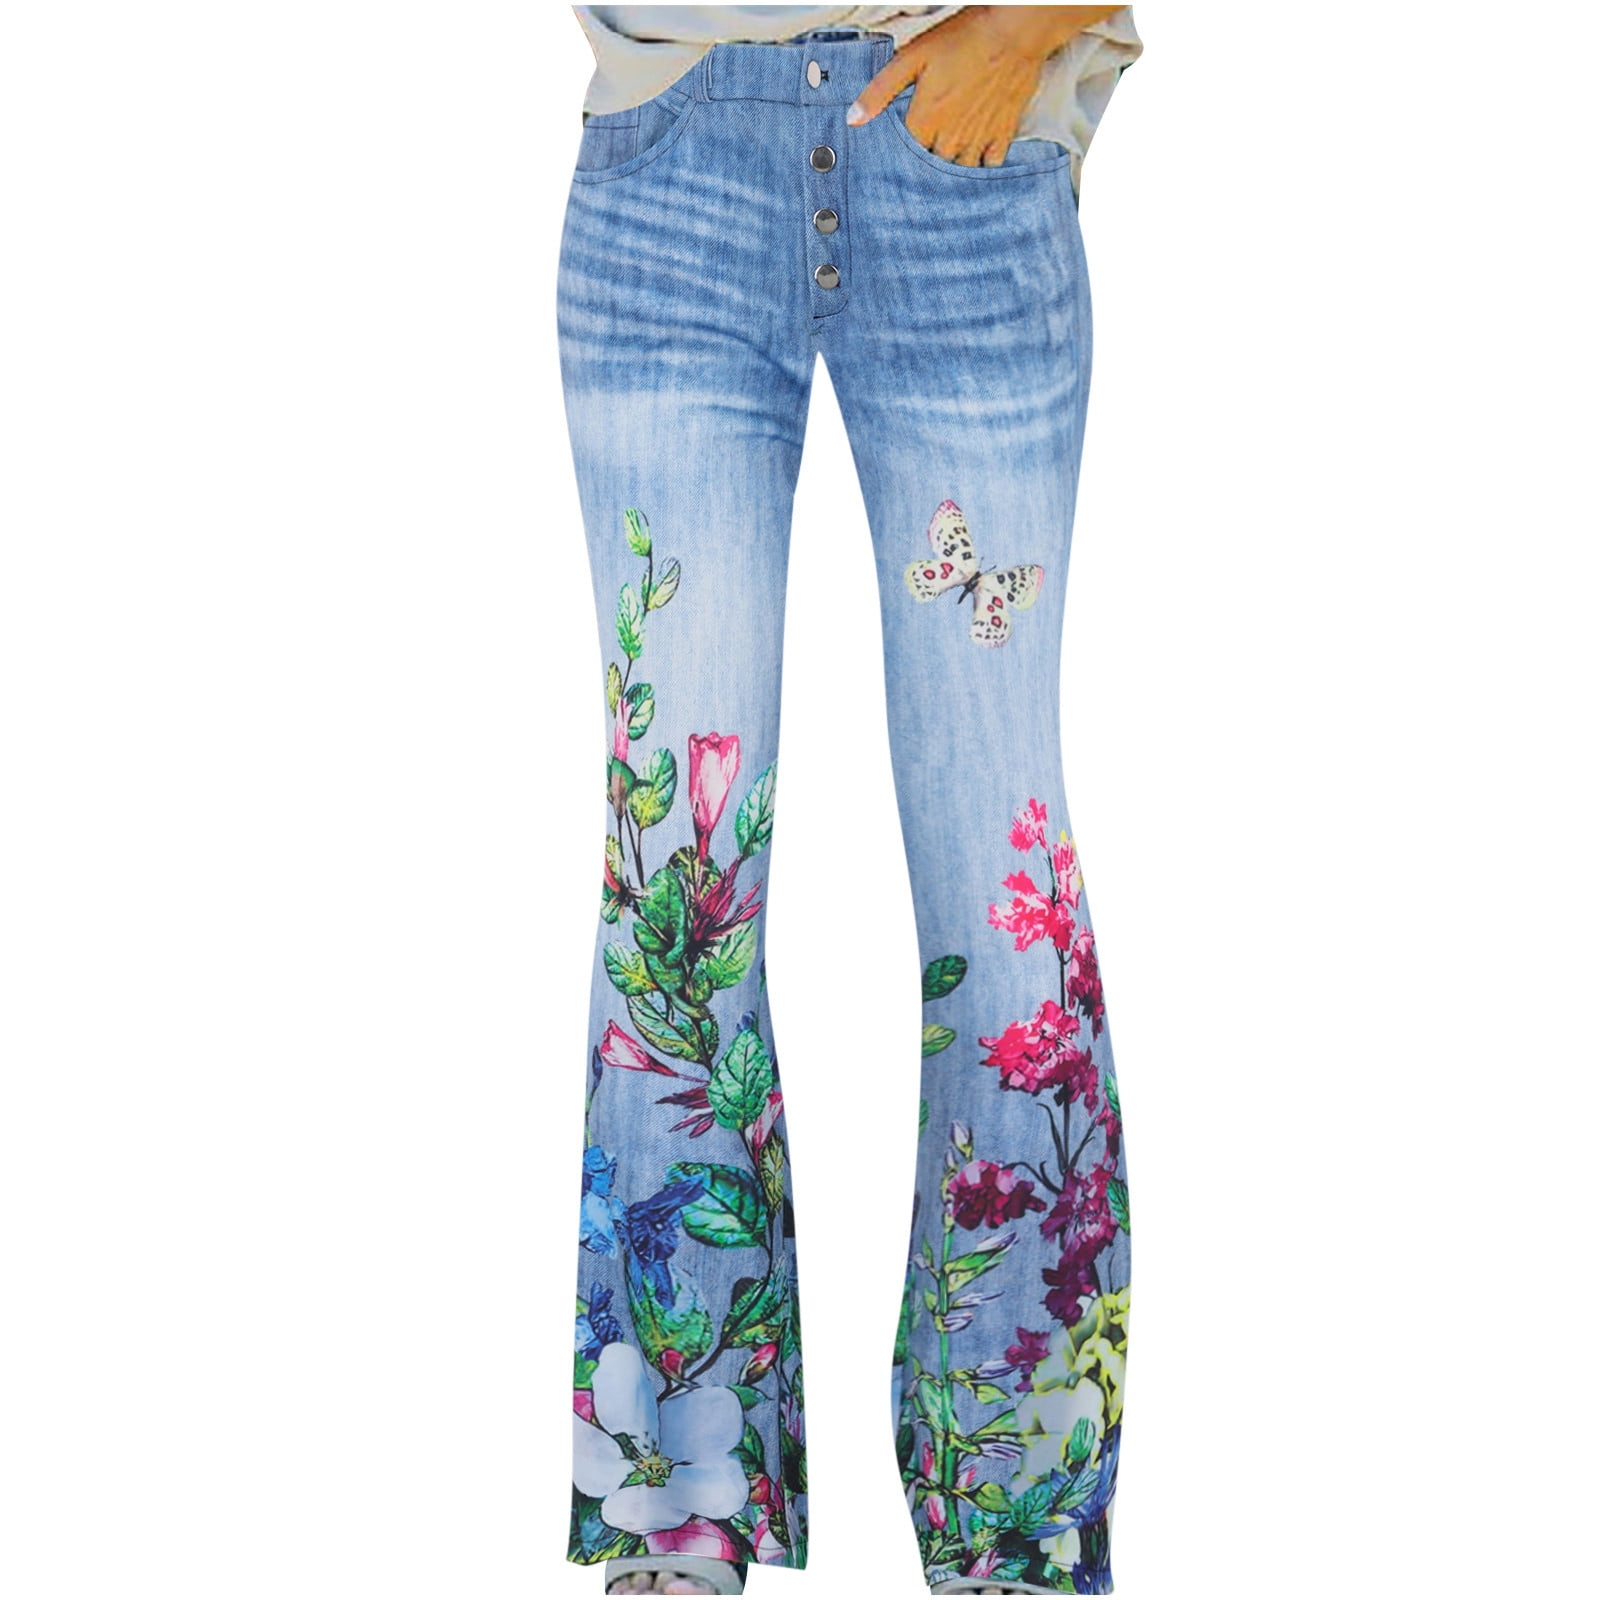 Mid Rise Jeans for Women Vintage Embroidery Floral Stretch Skinny